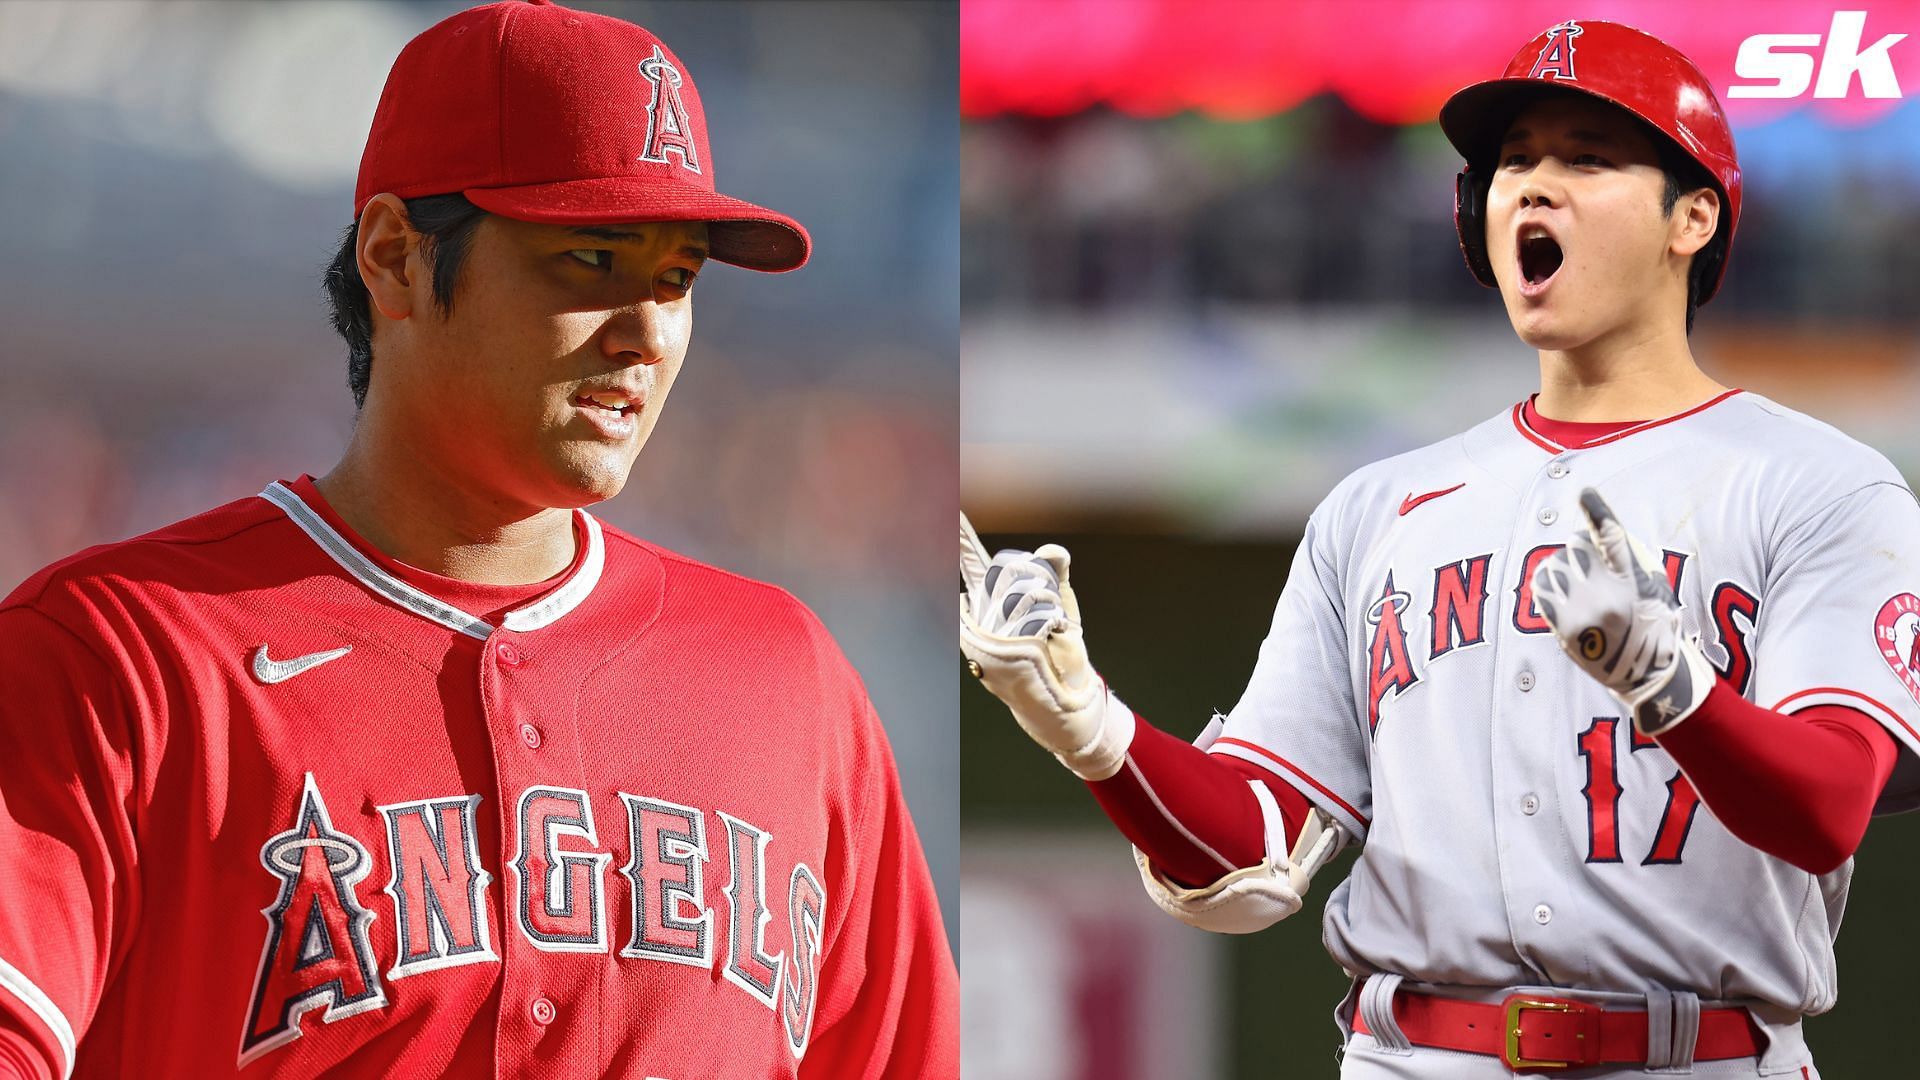 Shohei Ohtani's sweet reaction to his anime character debut in The Show 22  | Marca